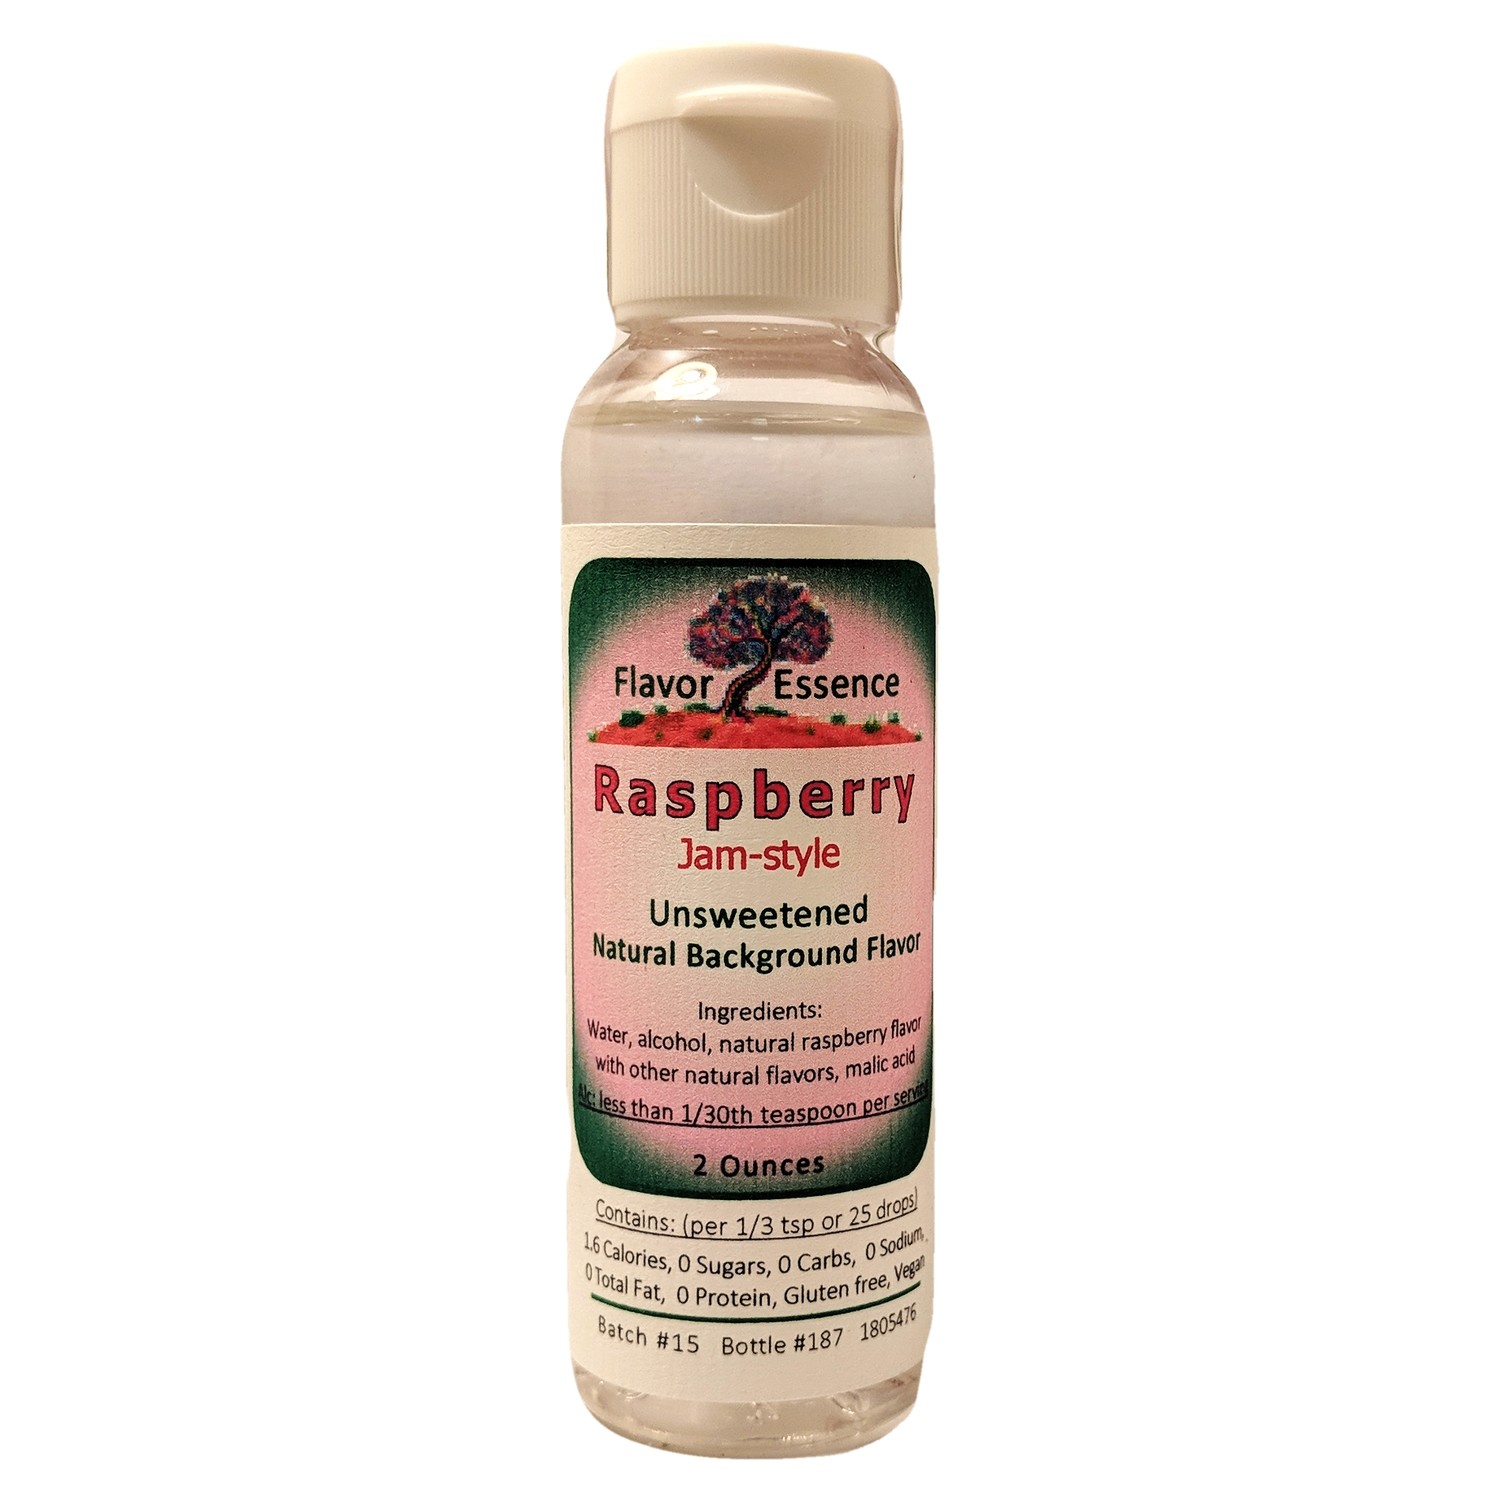 Flavor Essence Raspberry 2oz - Natural Unsweetened Background Flavoring